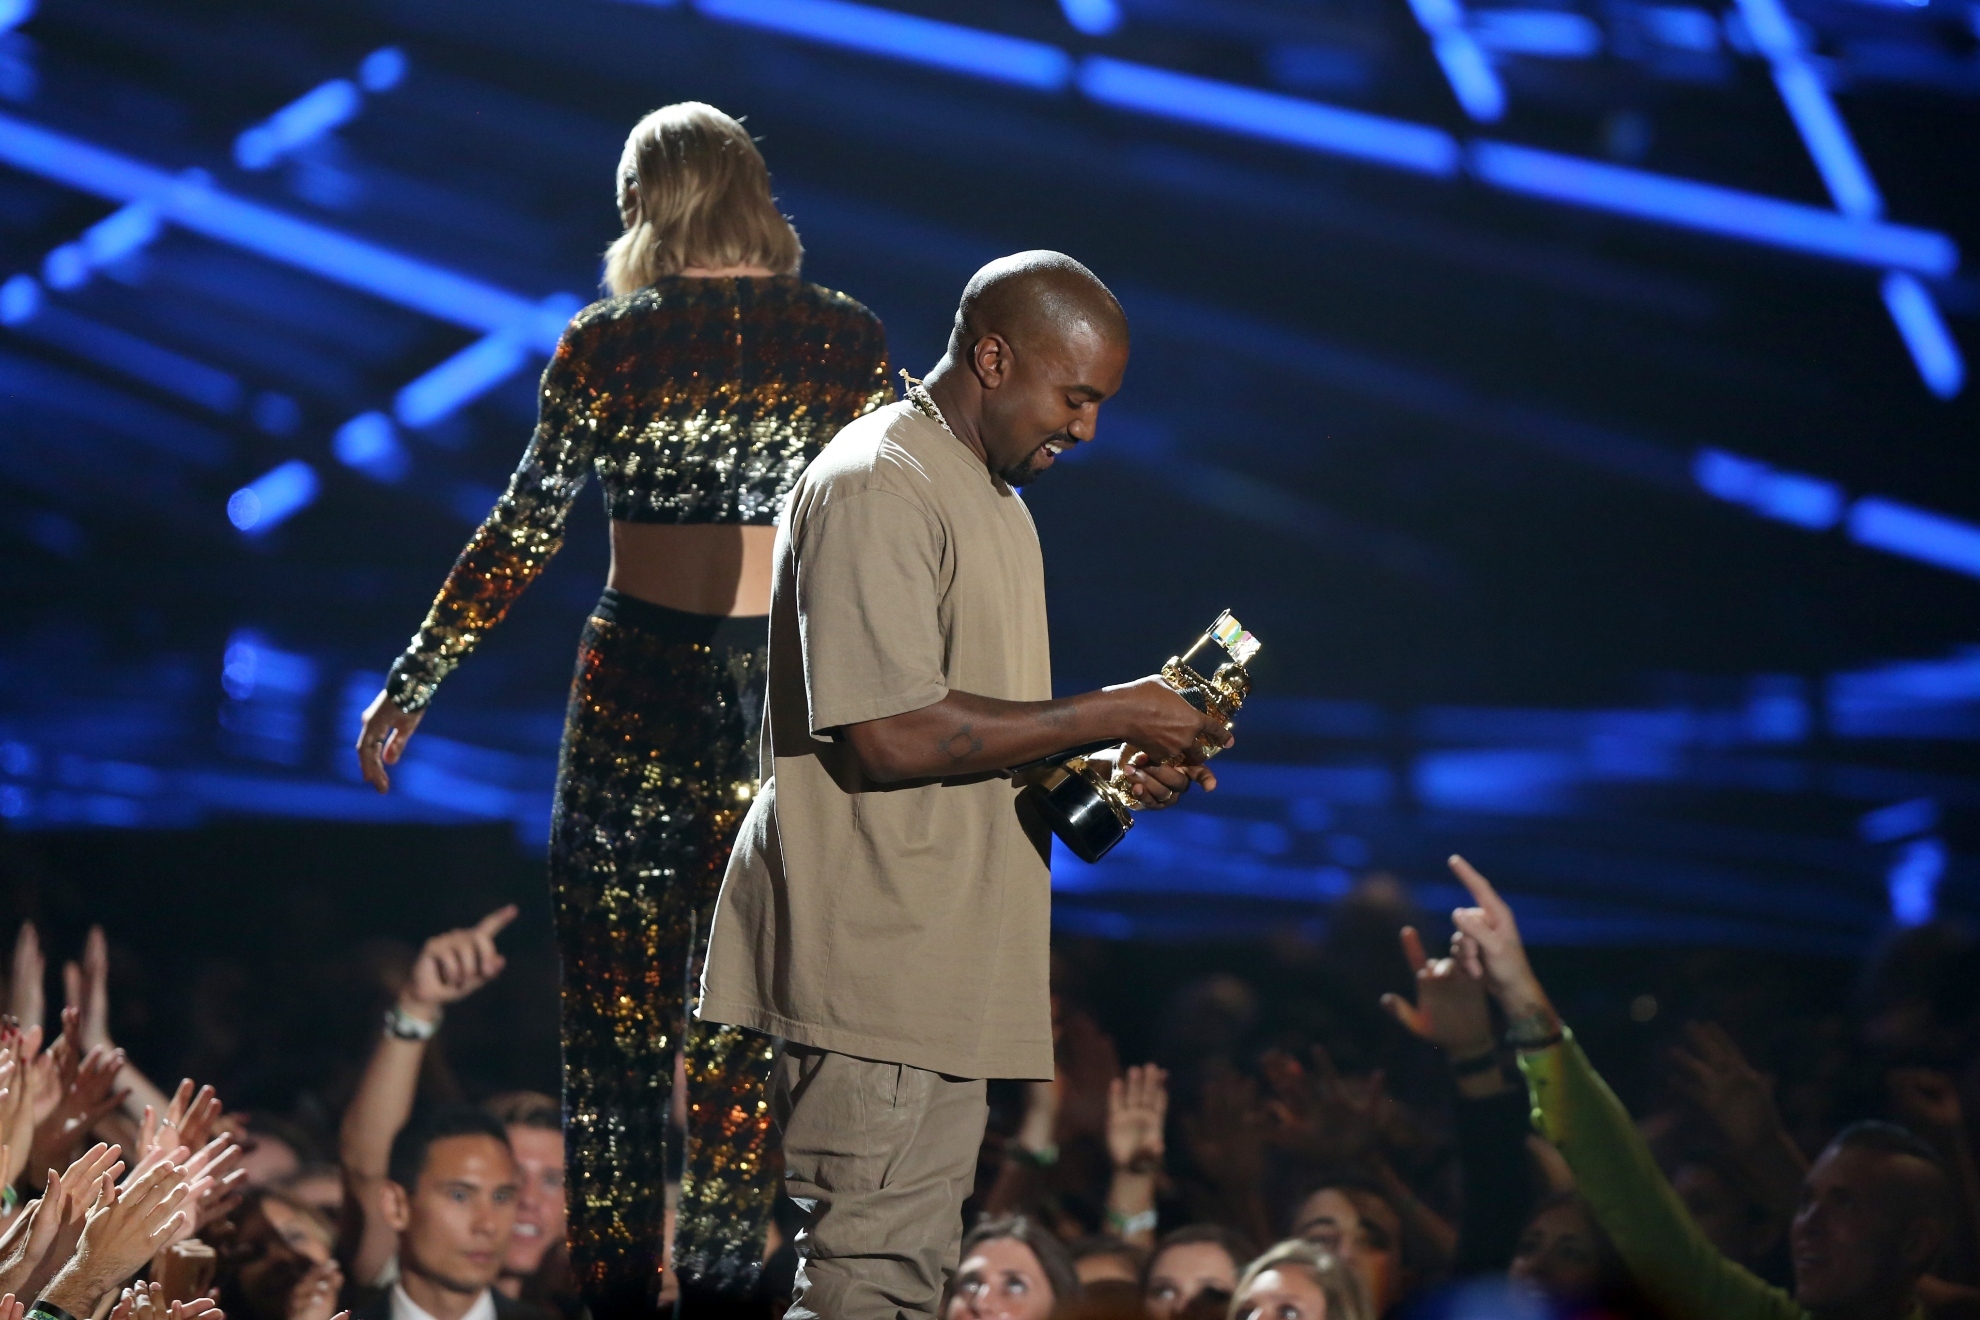 Kanye West gets an award from Taylor Swift